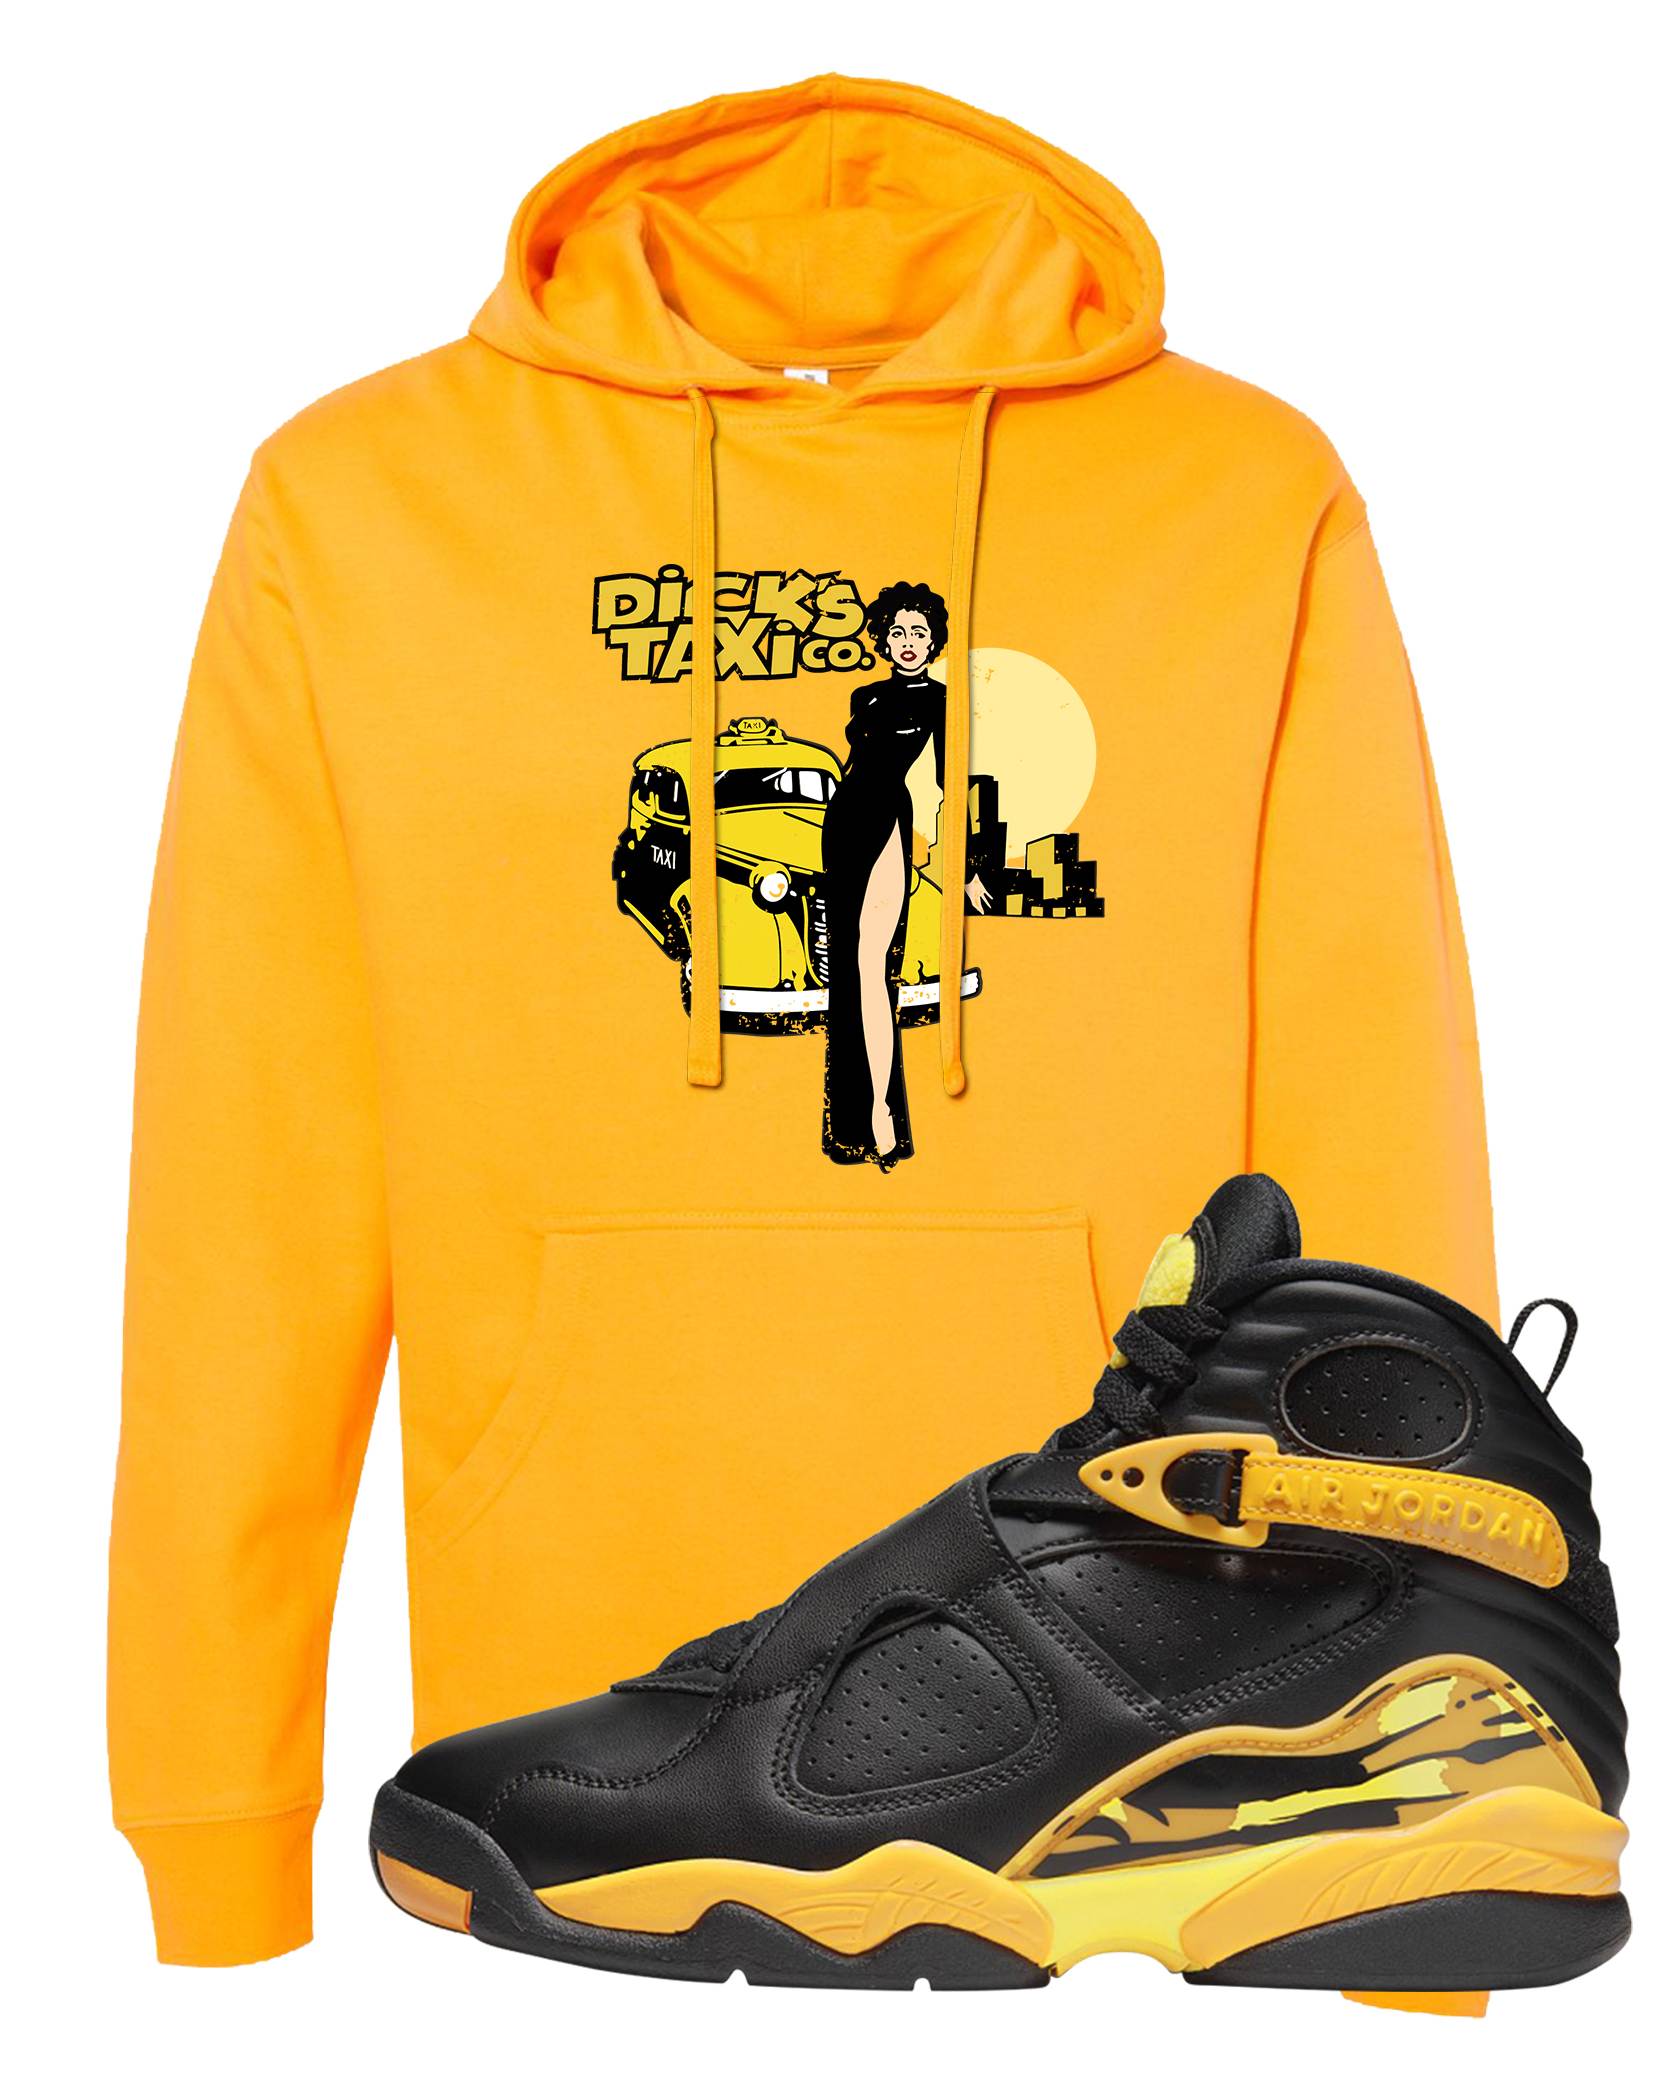 Taxi 8s Hoodie | Dick's Taxi Co., Gold